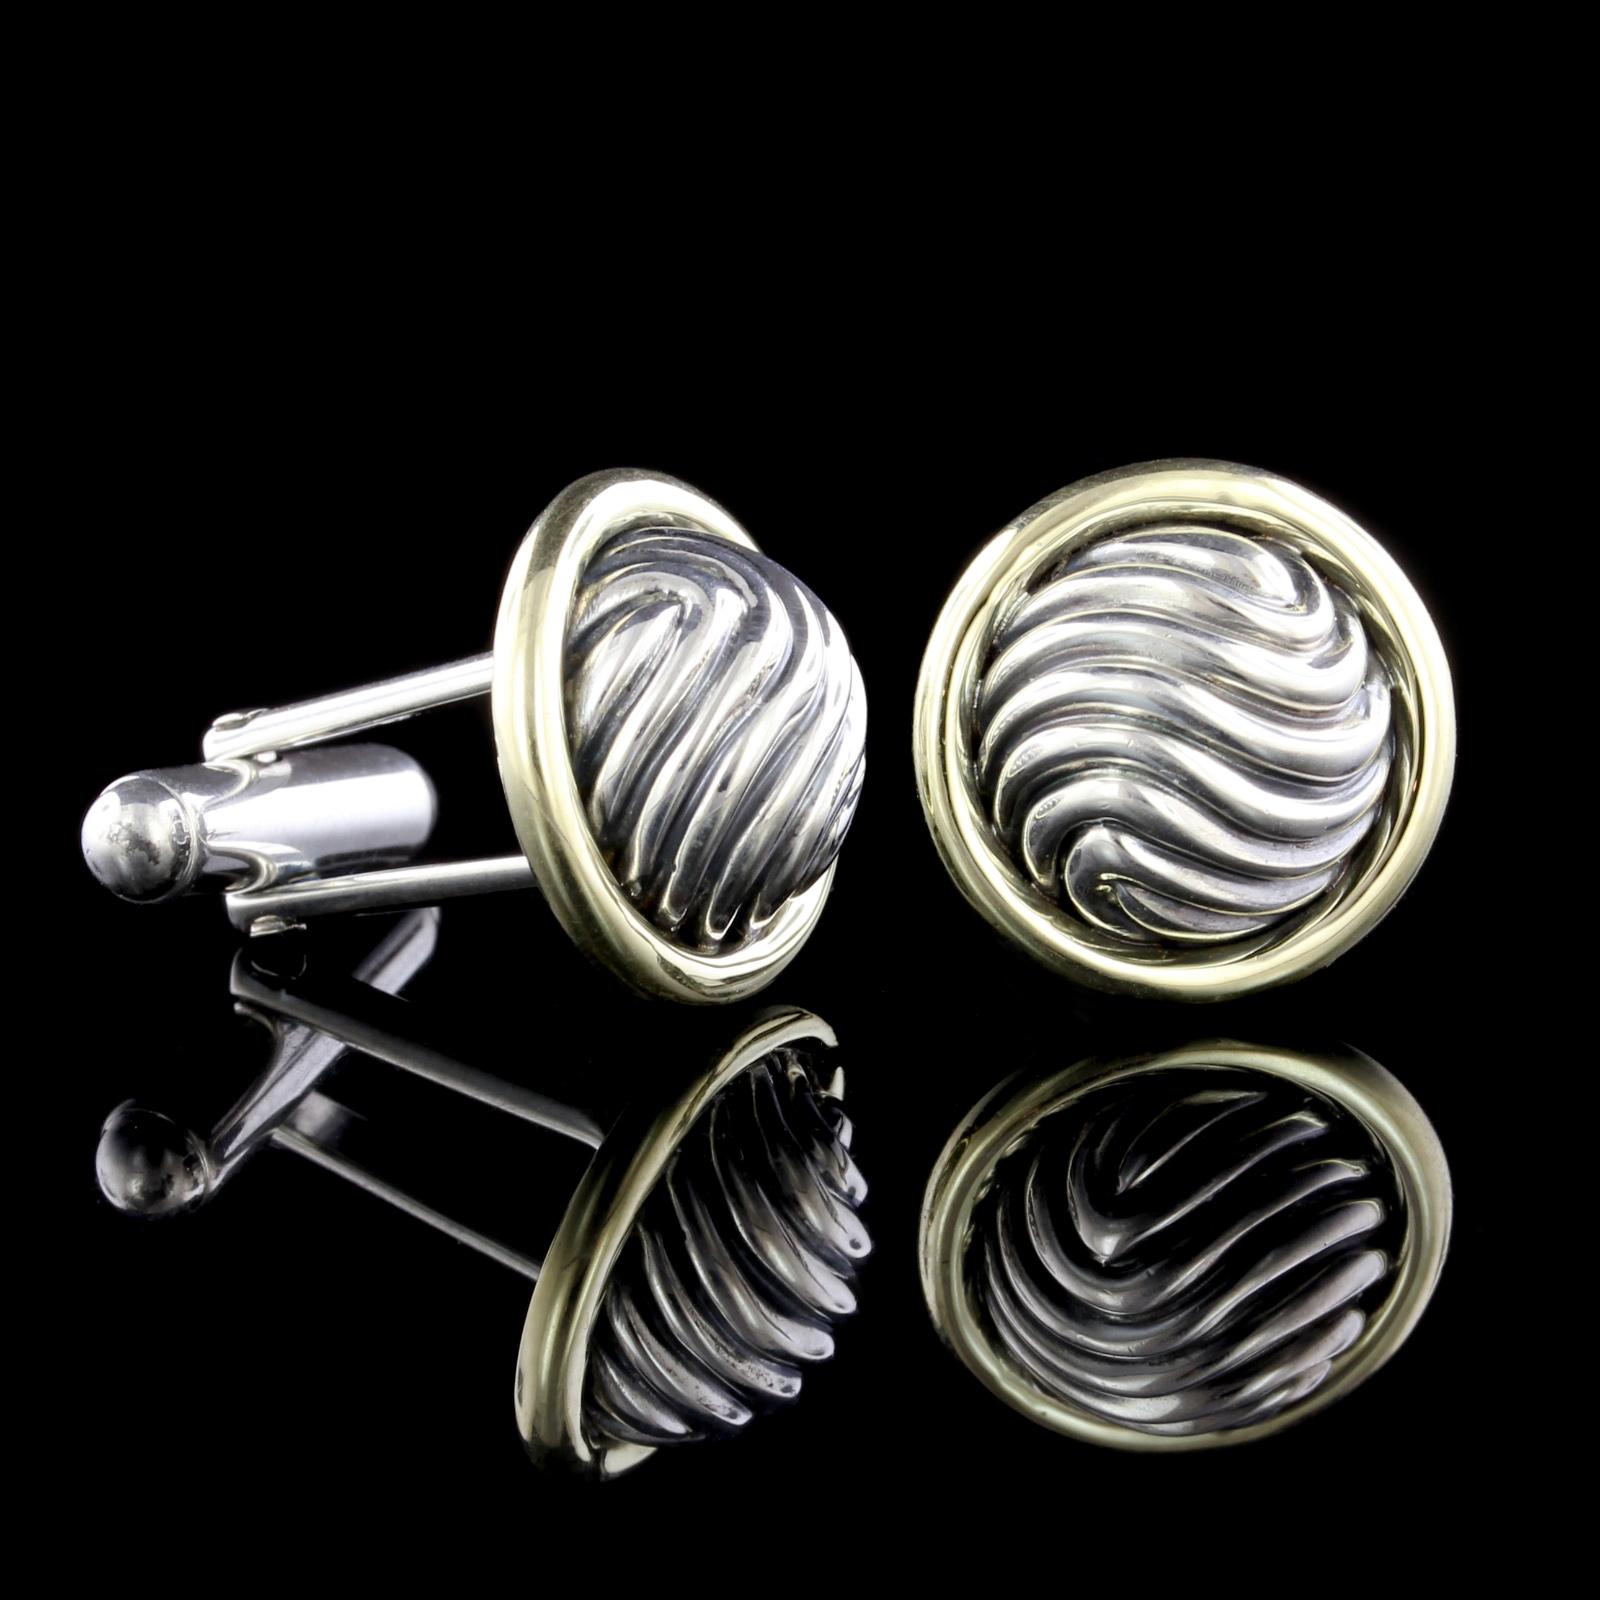 David Yurman Sterling Silver and 14K Yellow Gold Domed Cable Cufflinks.
Diameter 16.70mm.